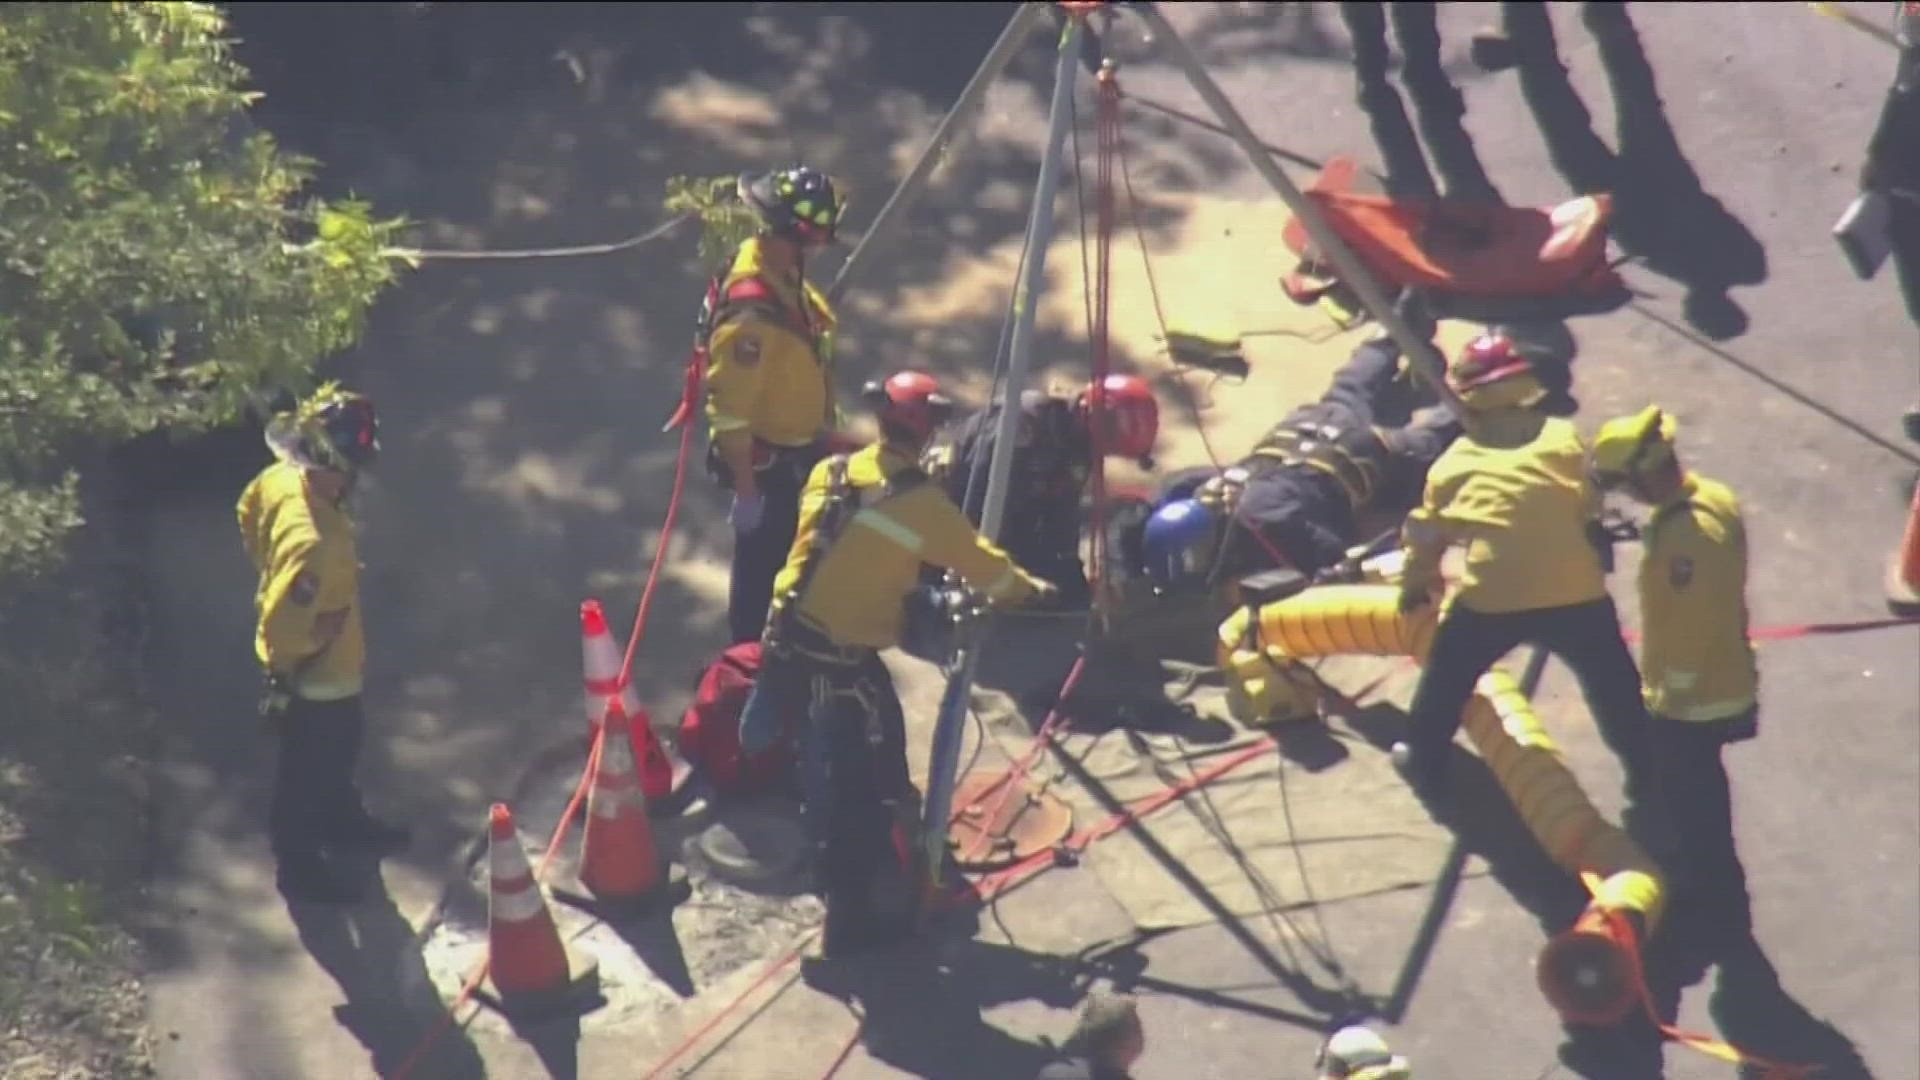 Firefighters rescued a road construction worker who fell about 20 feet down a manhole in California Thursday.